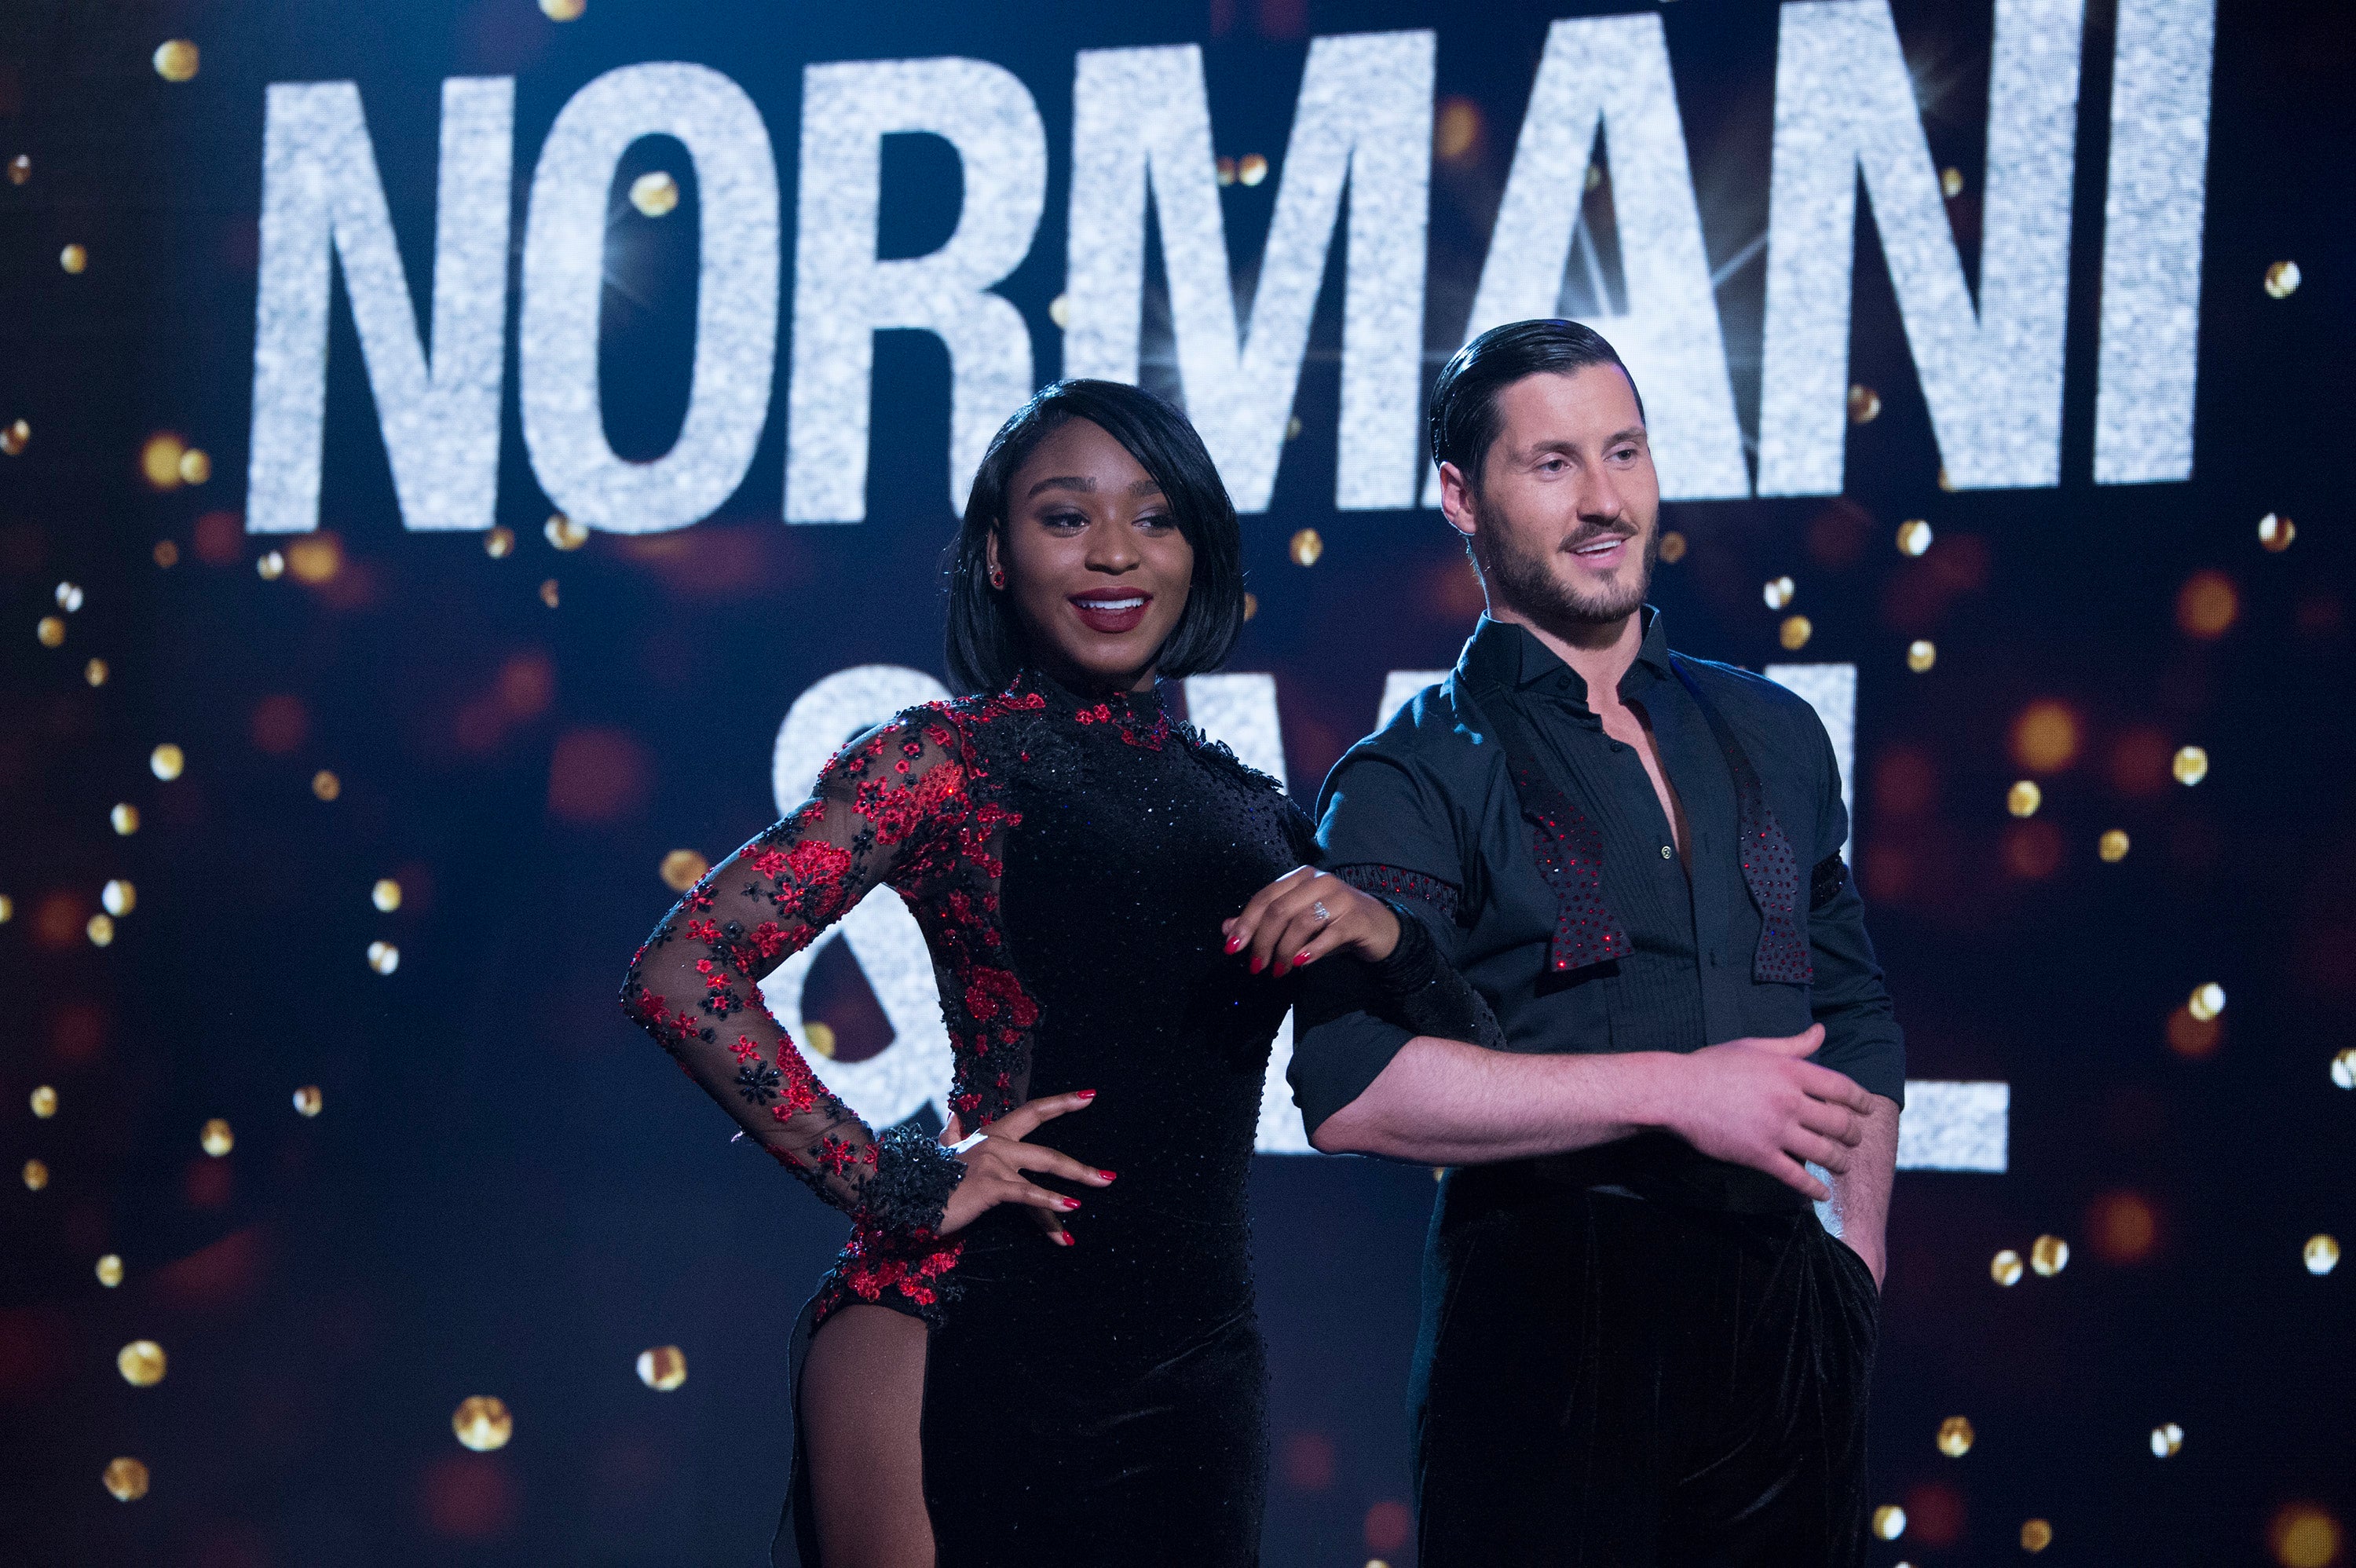 Normani Kordei Reveals Her Fun Plans For Her 21st Birthday